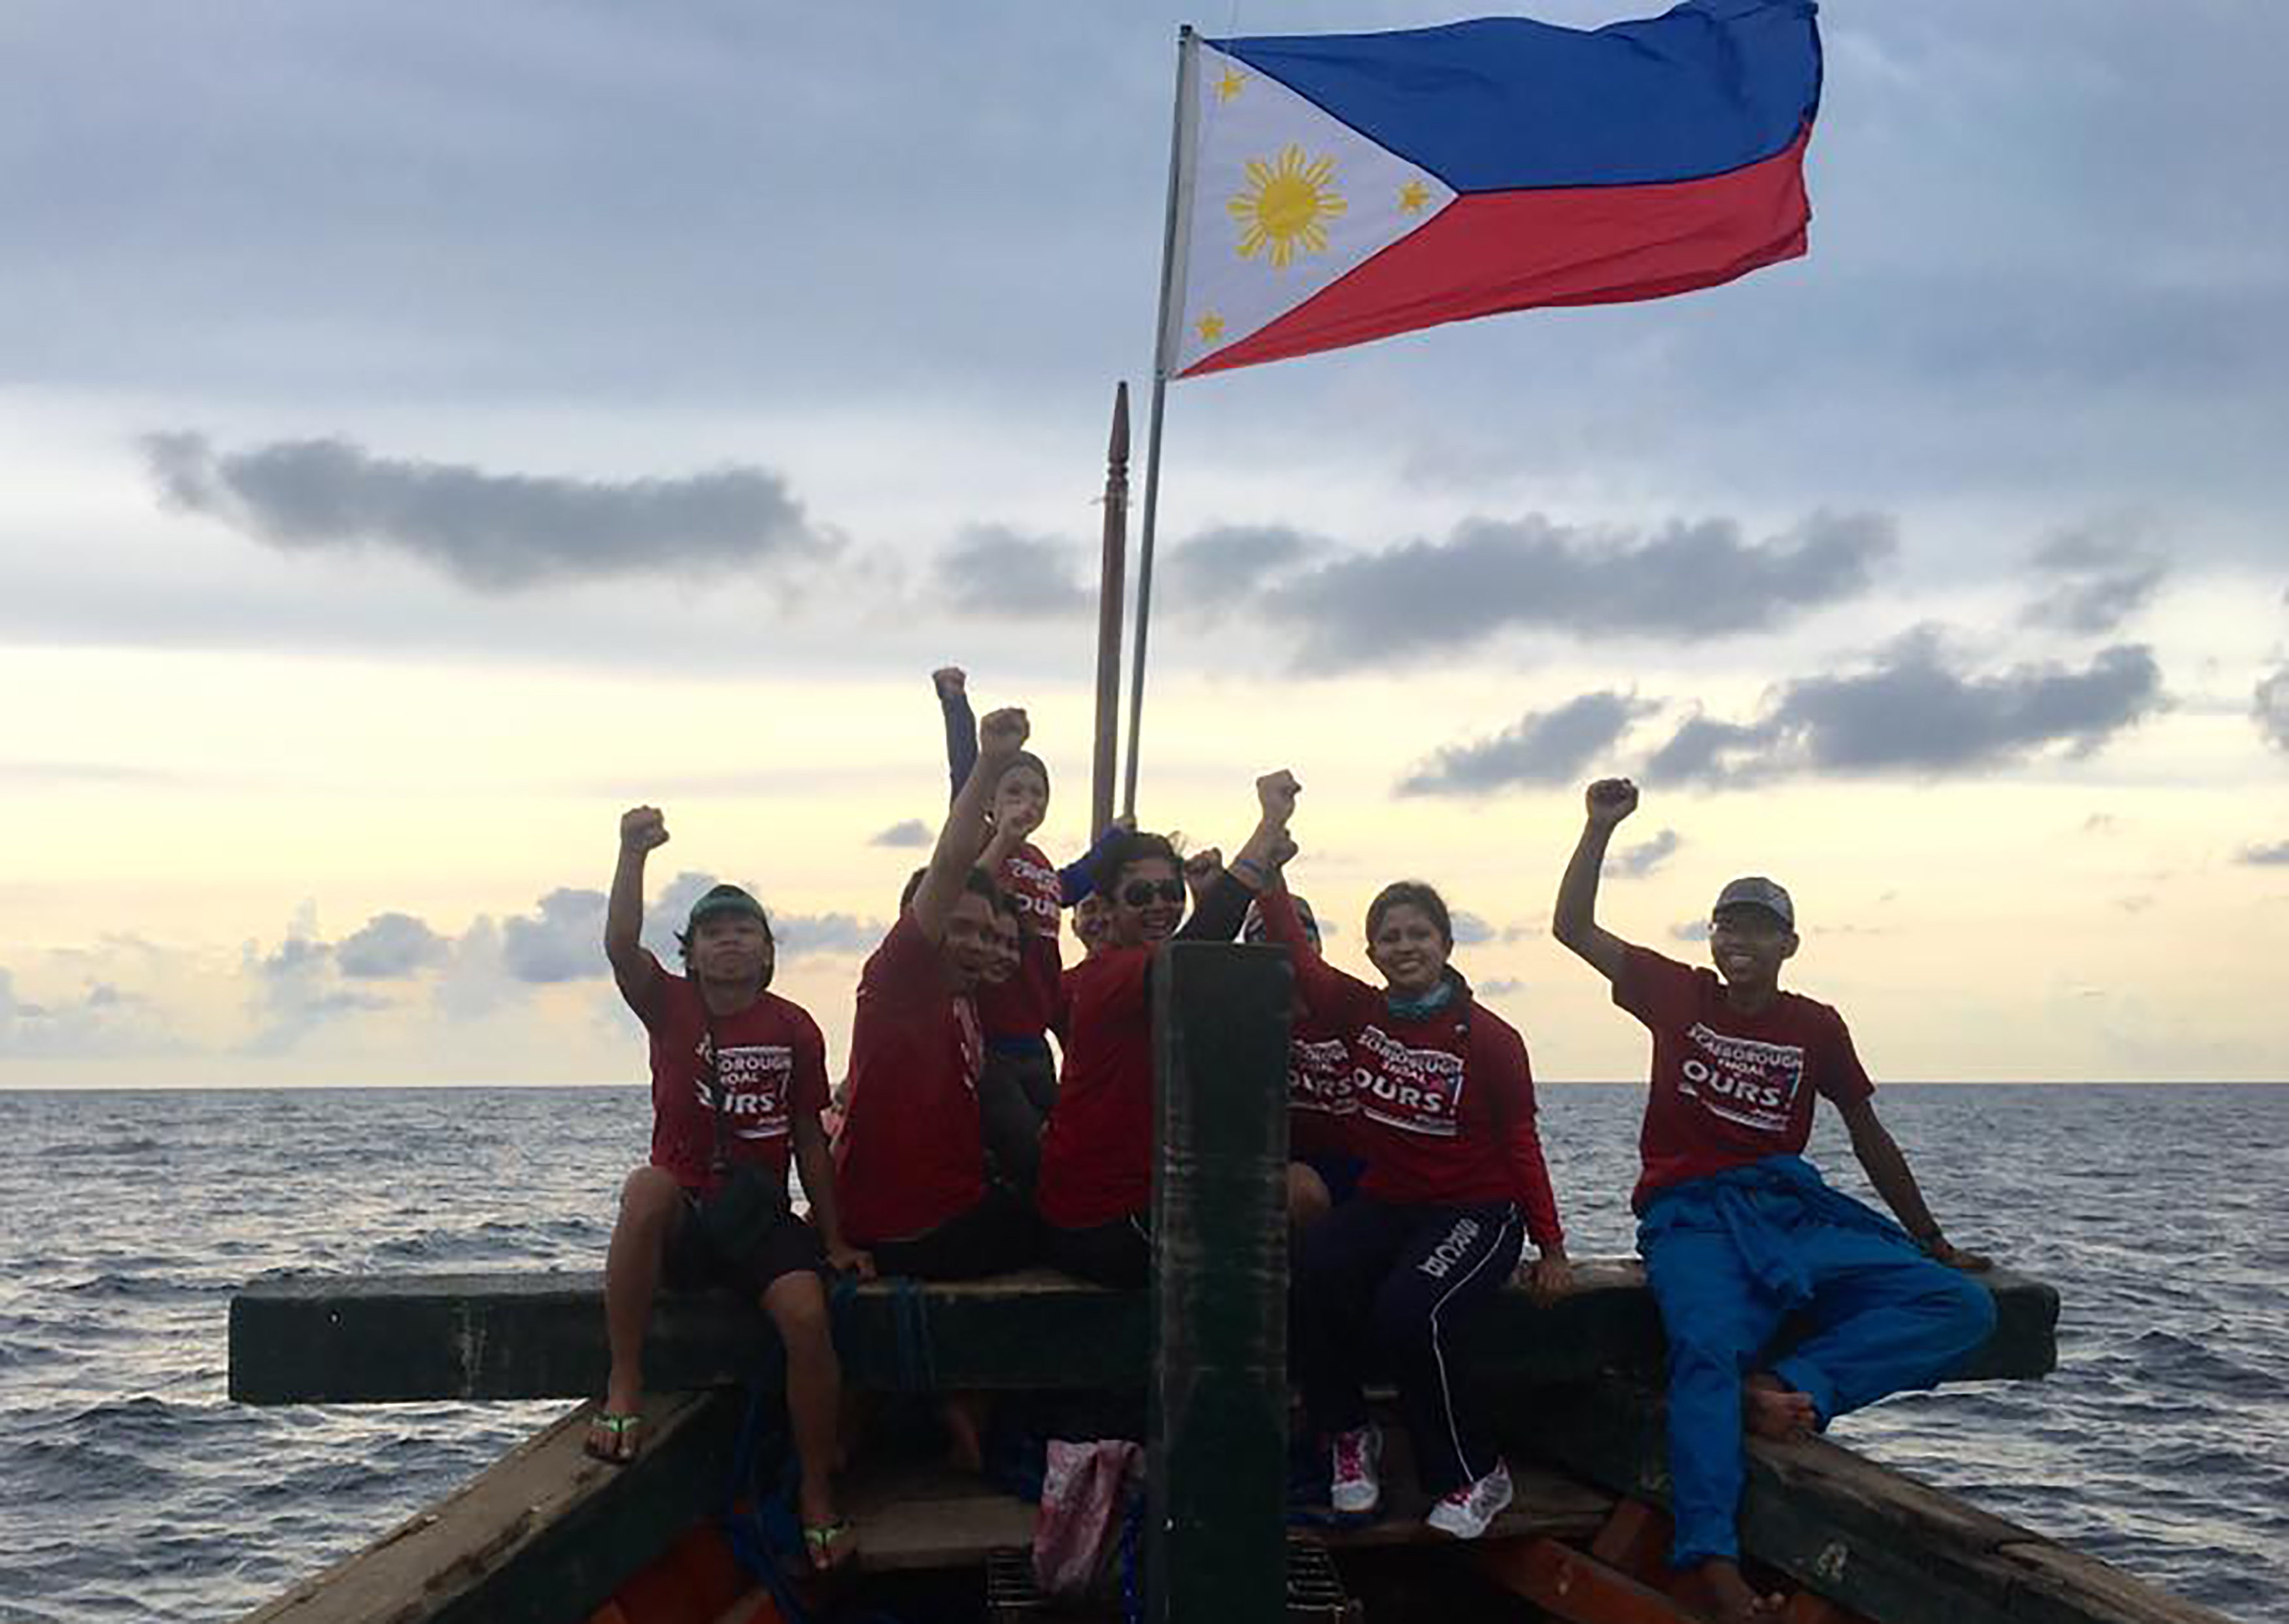 This undated handout photo taken from the Facebook account of Kalayaan Atin Ito (Kalayaan This Is Ours), a group of Filipino activists, made available to Agence France-Presse on June 13, 2016 shows a Filipino activists posing for photo at the bow of thei vessel next to a Philippine flag at Scarborough shoal. Filipino protesters said on June 13, 2016 China's coast guard blocked and sprayed them with water as their small group sailed to a Chinese-controlled South China Sea shoal to mark Philippine independence day. / AFP PHOTO / KALAYAAN ATIN TIO / HO / -----EDITORS NOTE --- RESTRICTED TO EDITORIAL USE - MANDATORY CREDIT "AFP PHOTO / KALAYAAN ATIN TIO" - NO MARKETING - NO ADVERTISING CAMPAIGNS - DISTRIBUTED AS A SERVICE TO CLIENTS - NO ARCHIVES